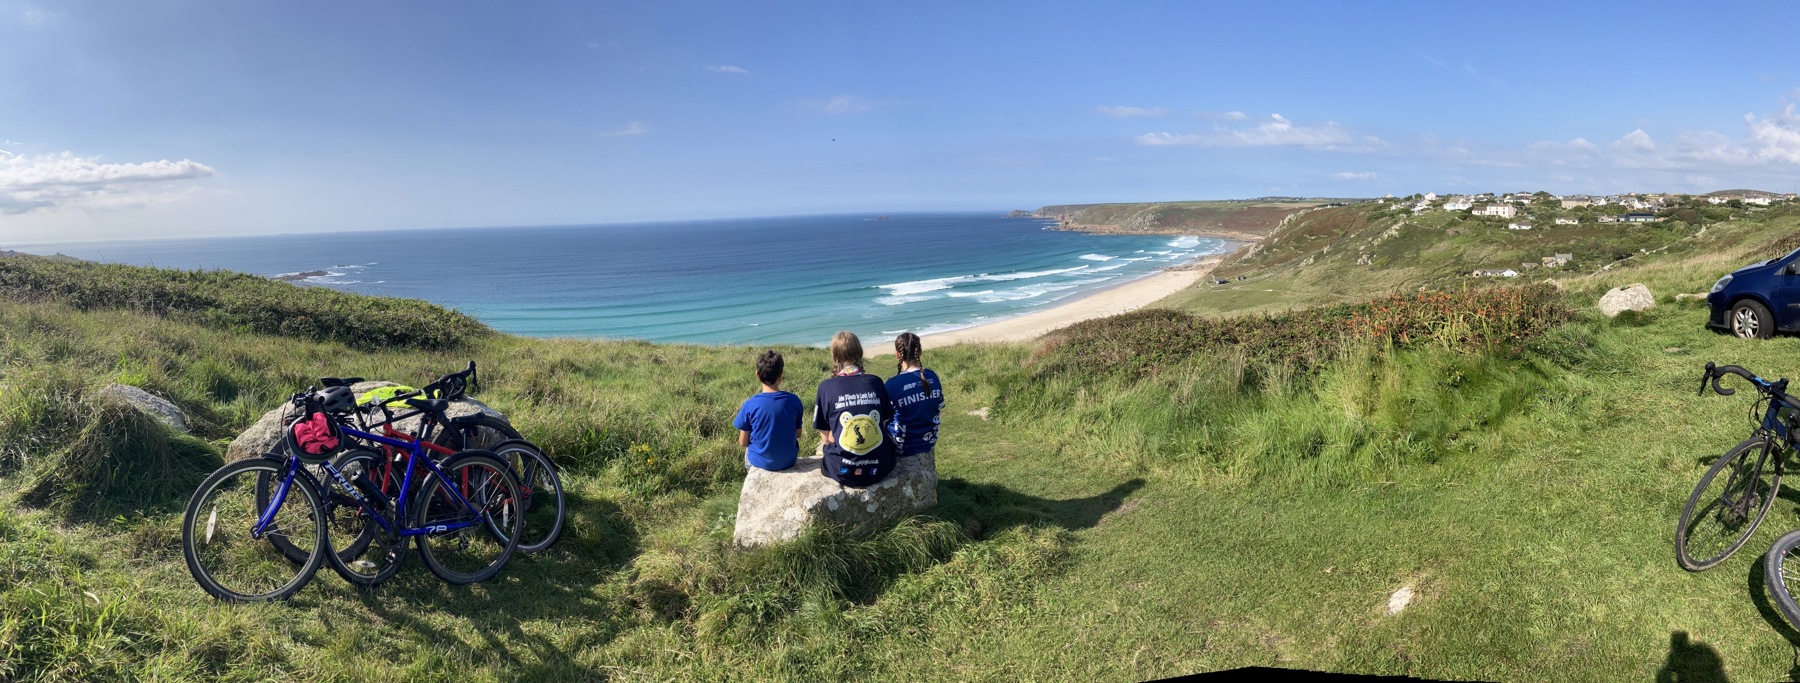 The image shows the backs of Ollie, Bethan and Hattie as they sit on a hill and look out towards the sea. Next to them are grassy hills and to their left are their bicycles and belongings. We can see the backs of their heads as they look at the view.